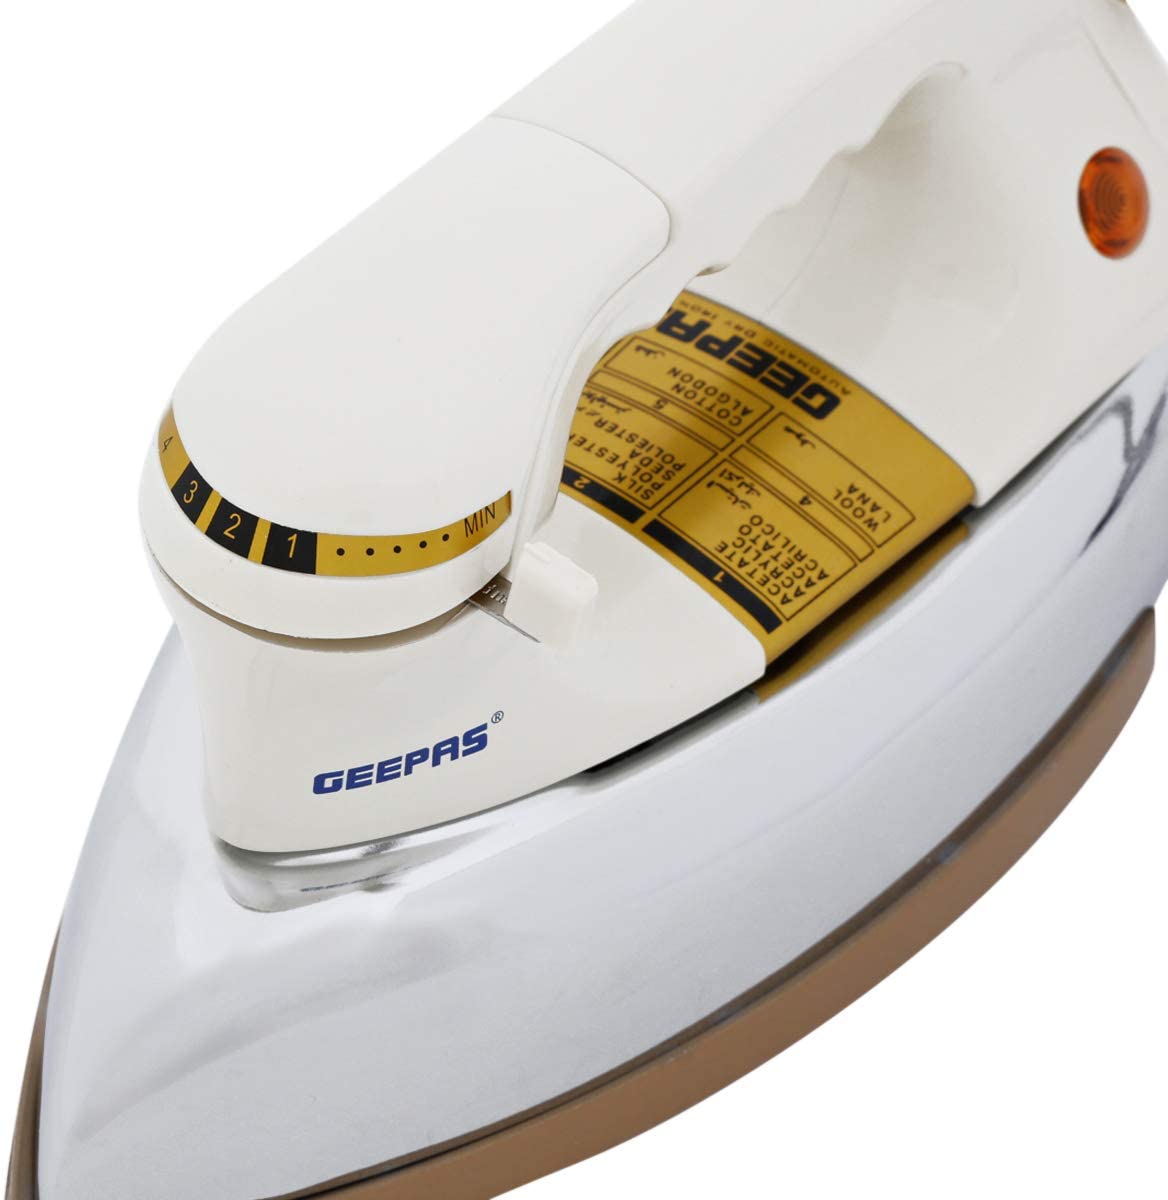 Geepas Dry Iron Cream And Silver | reliable performance | lightweight | variable steam settings | safety features | stylish | even heat distribution | Halabh.com